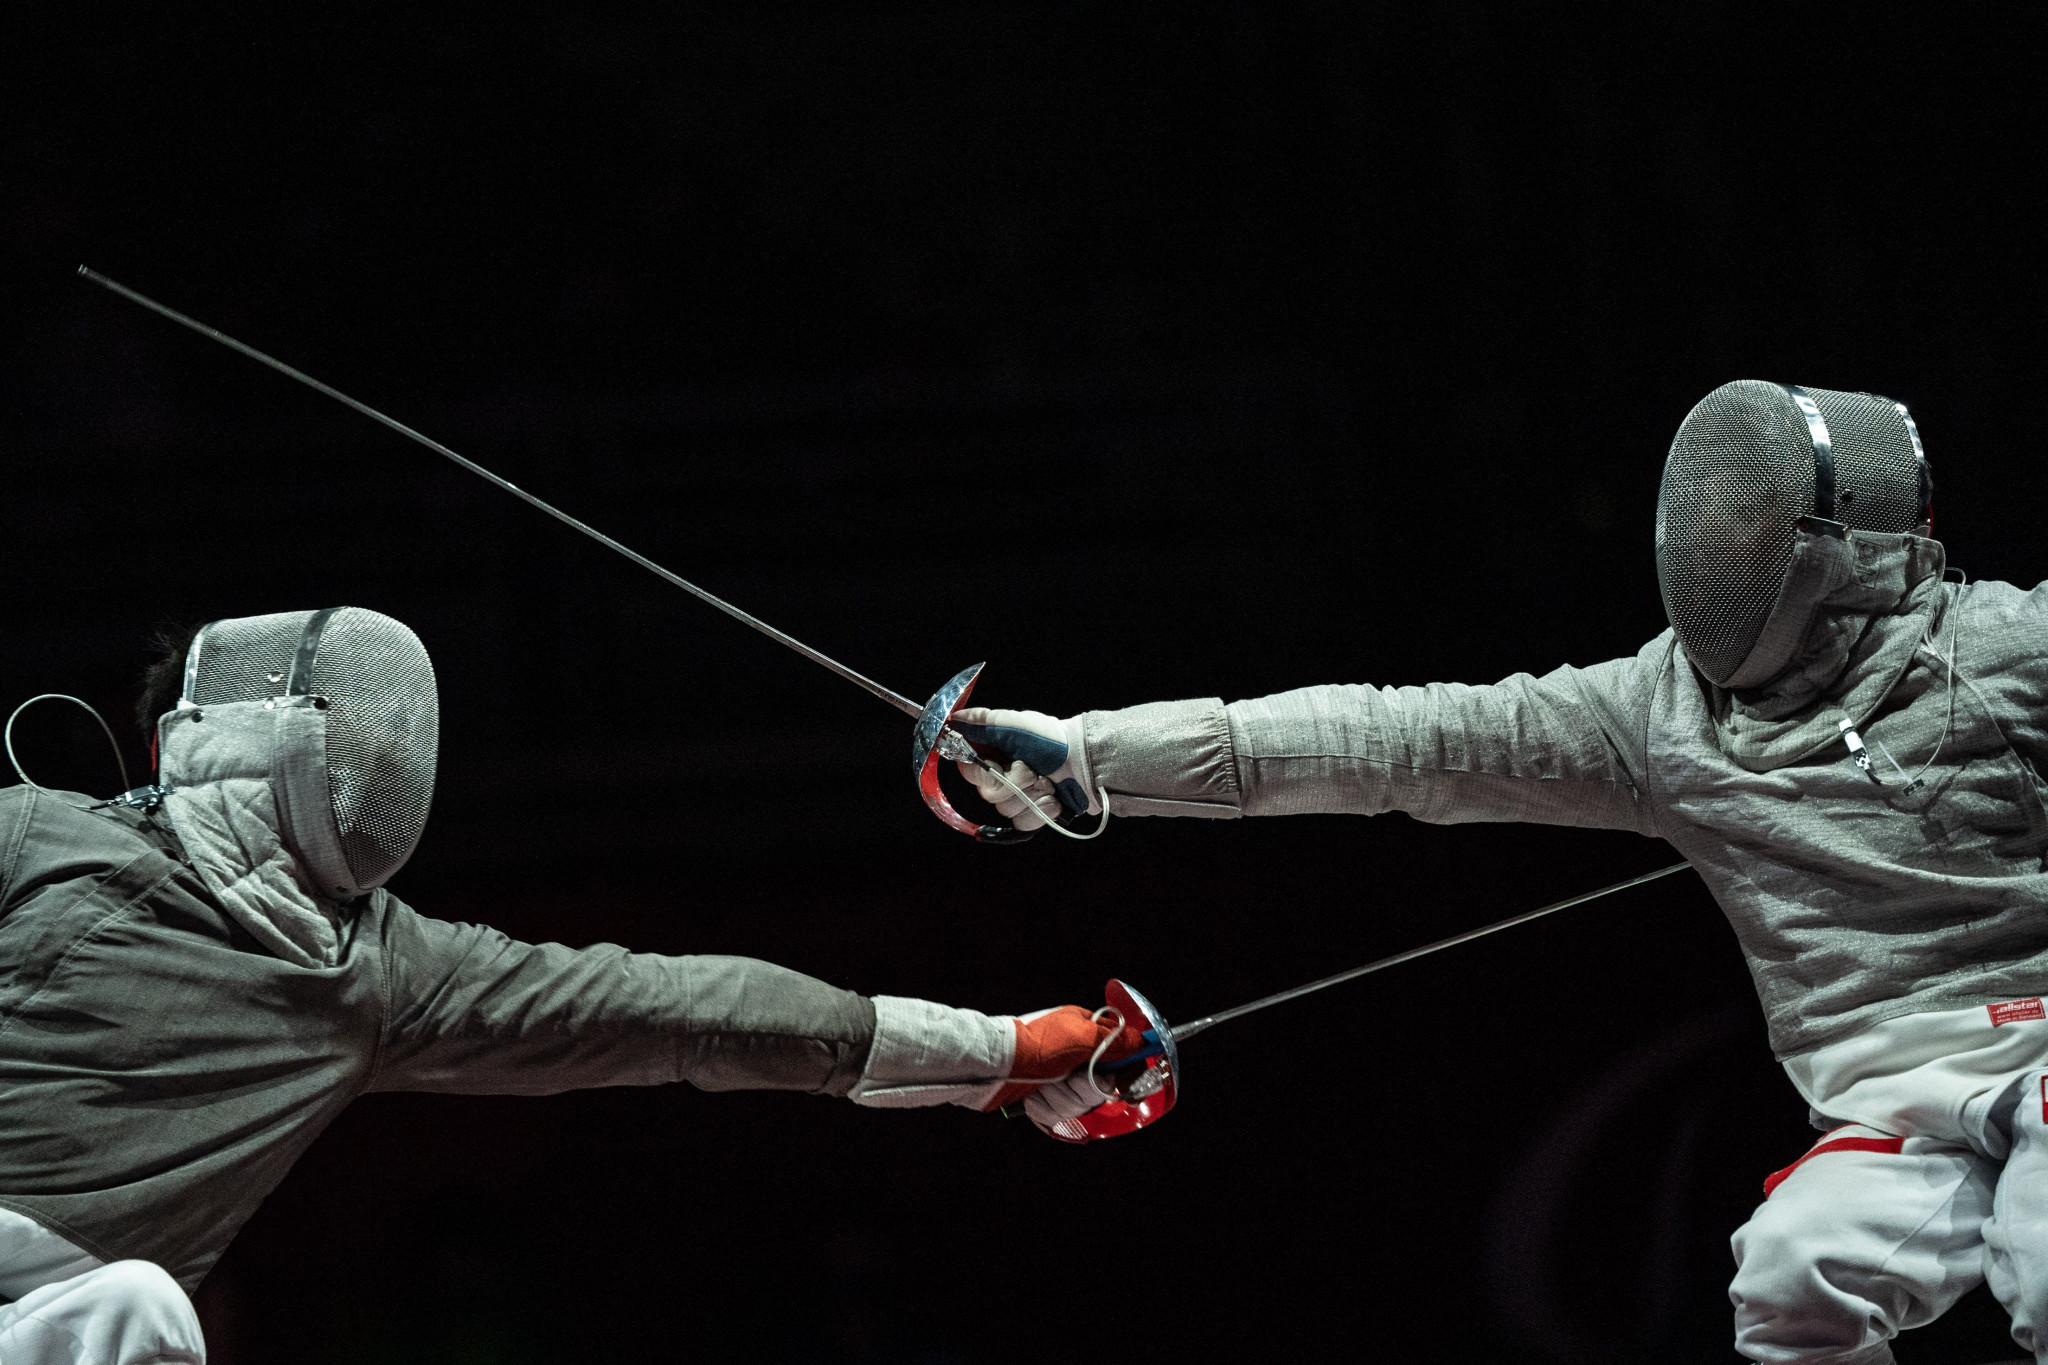 Warsaw is welcoming athletes for the third Wheelchair Fencing World Cup of the year ©Getty Images